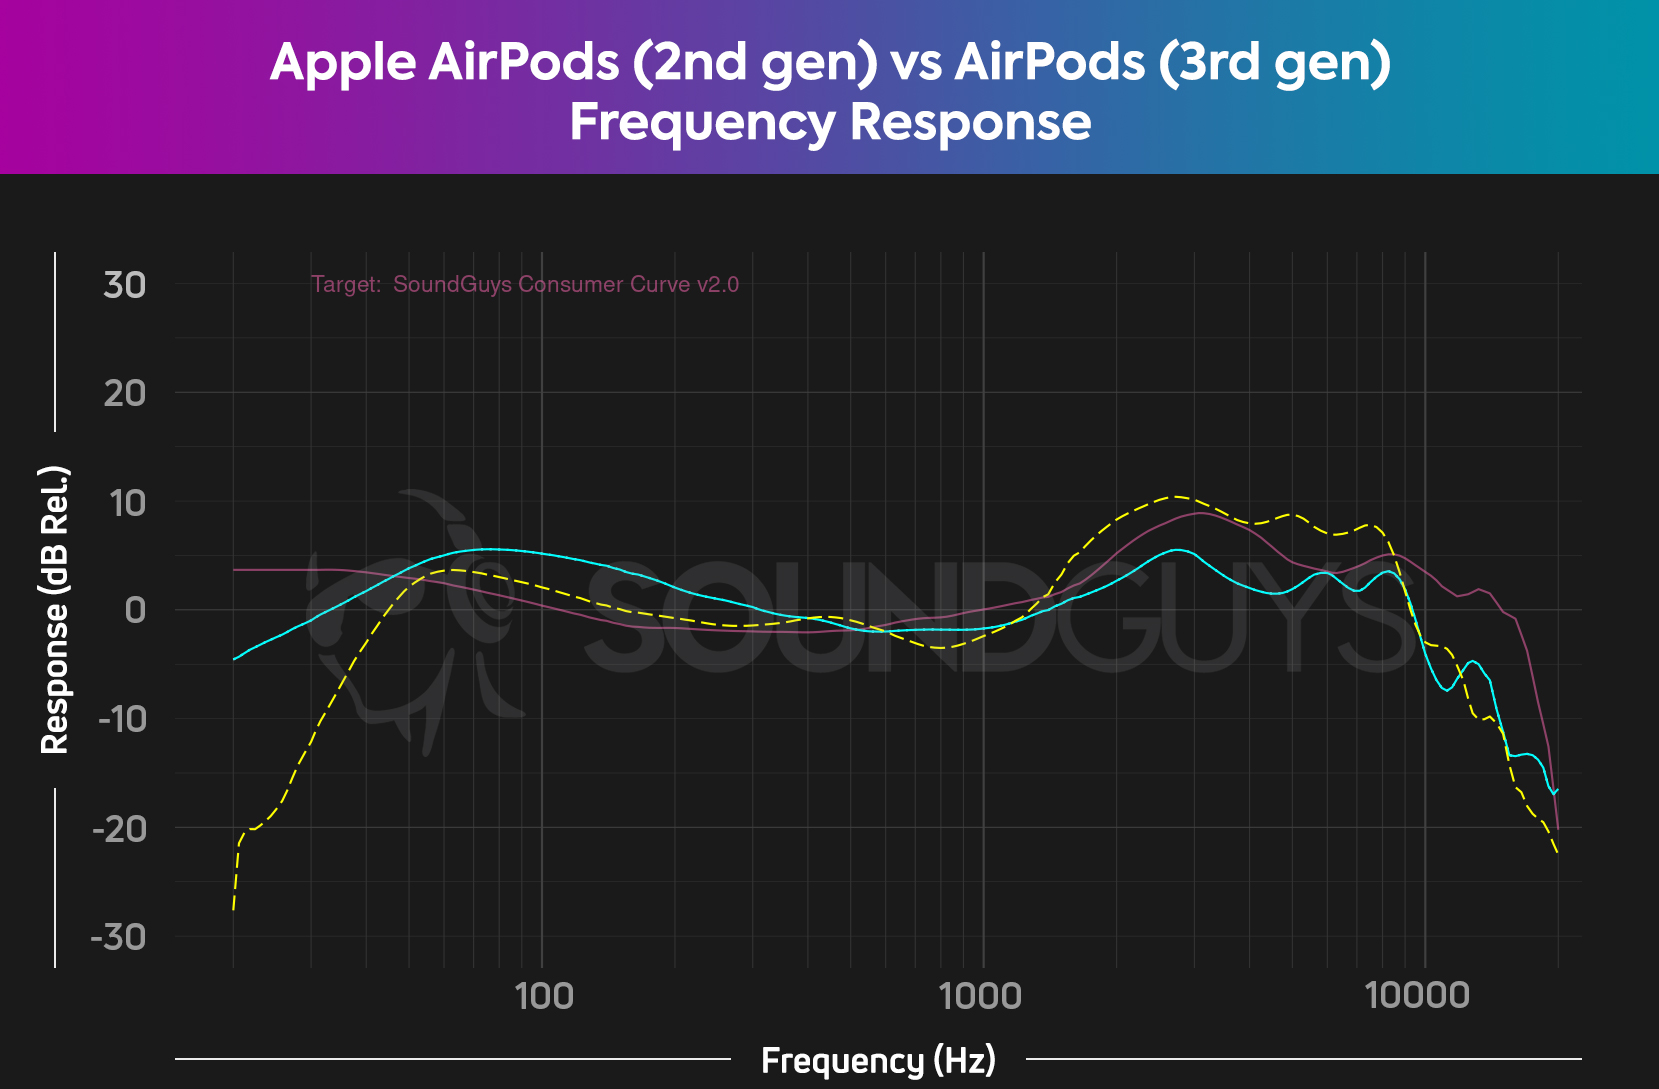 A chart compares the Apple AirPods (2nd generation) against the AirPods (3rd generation), as compared to the SoundGuys consumer curve.